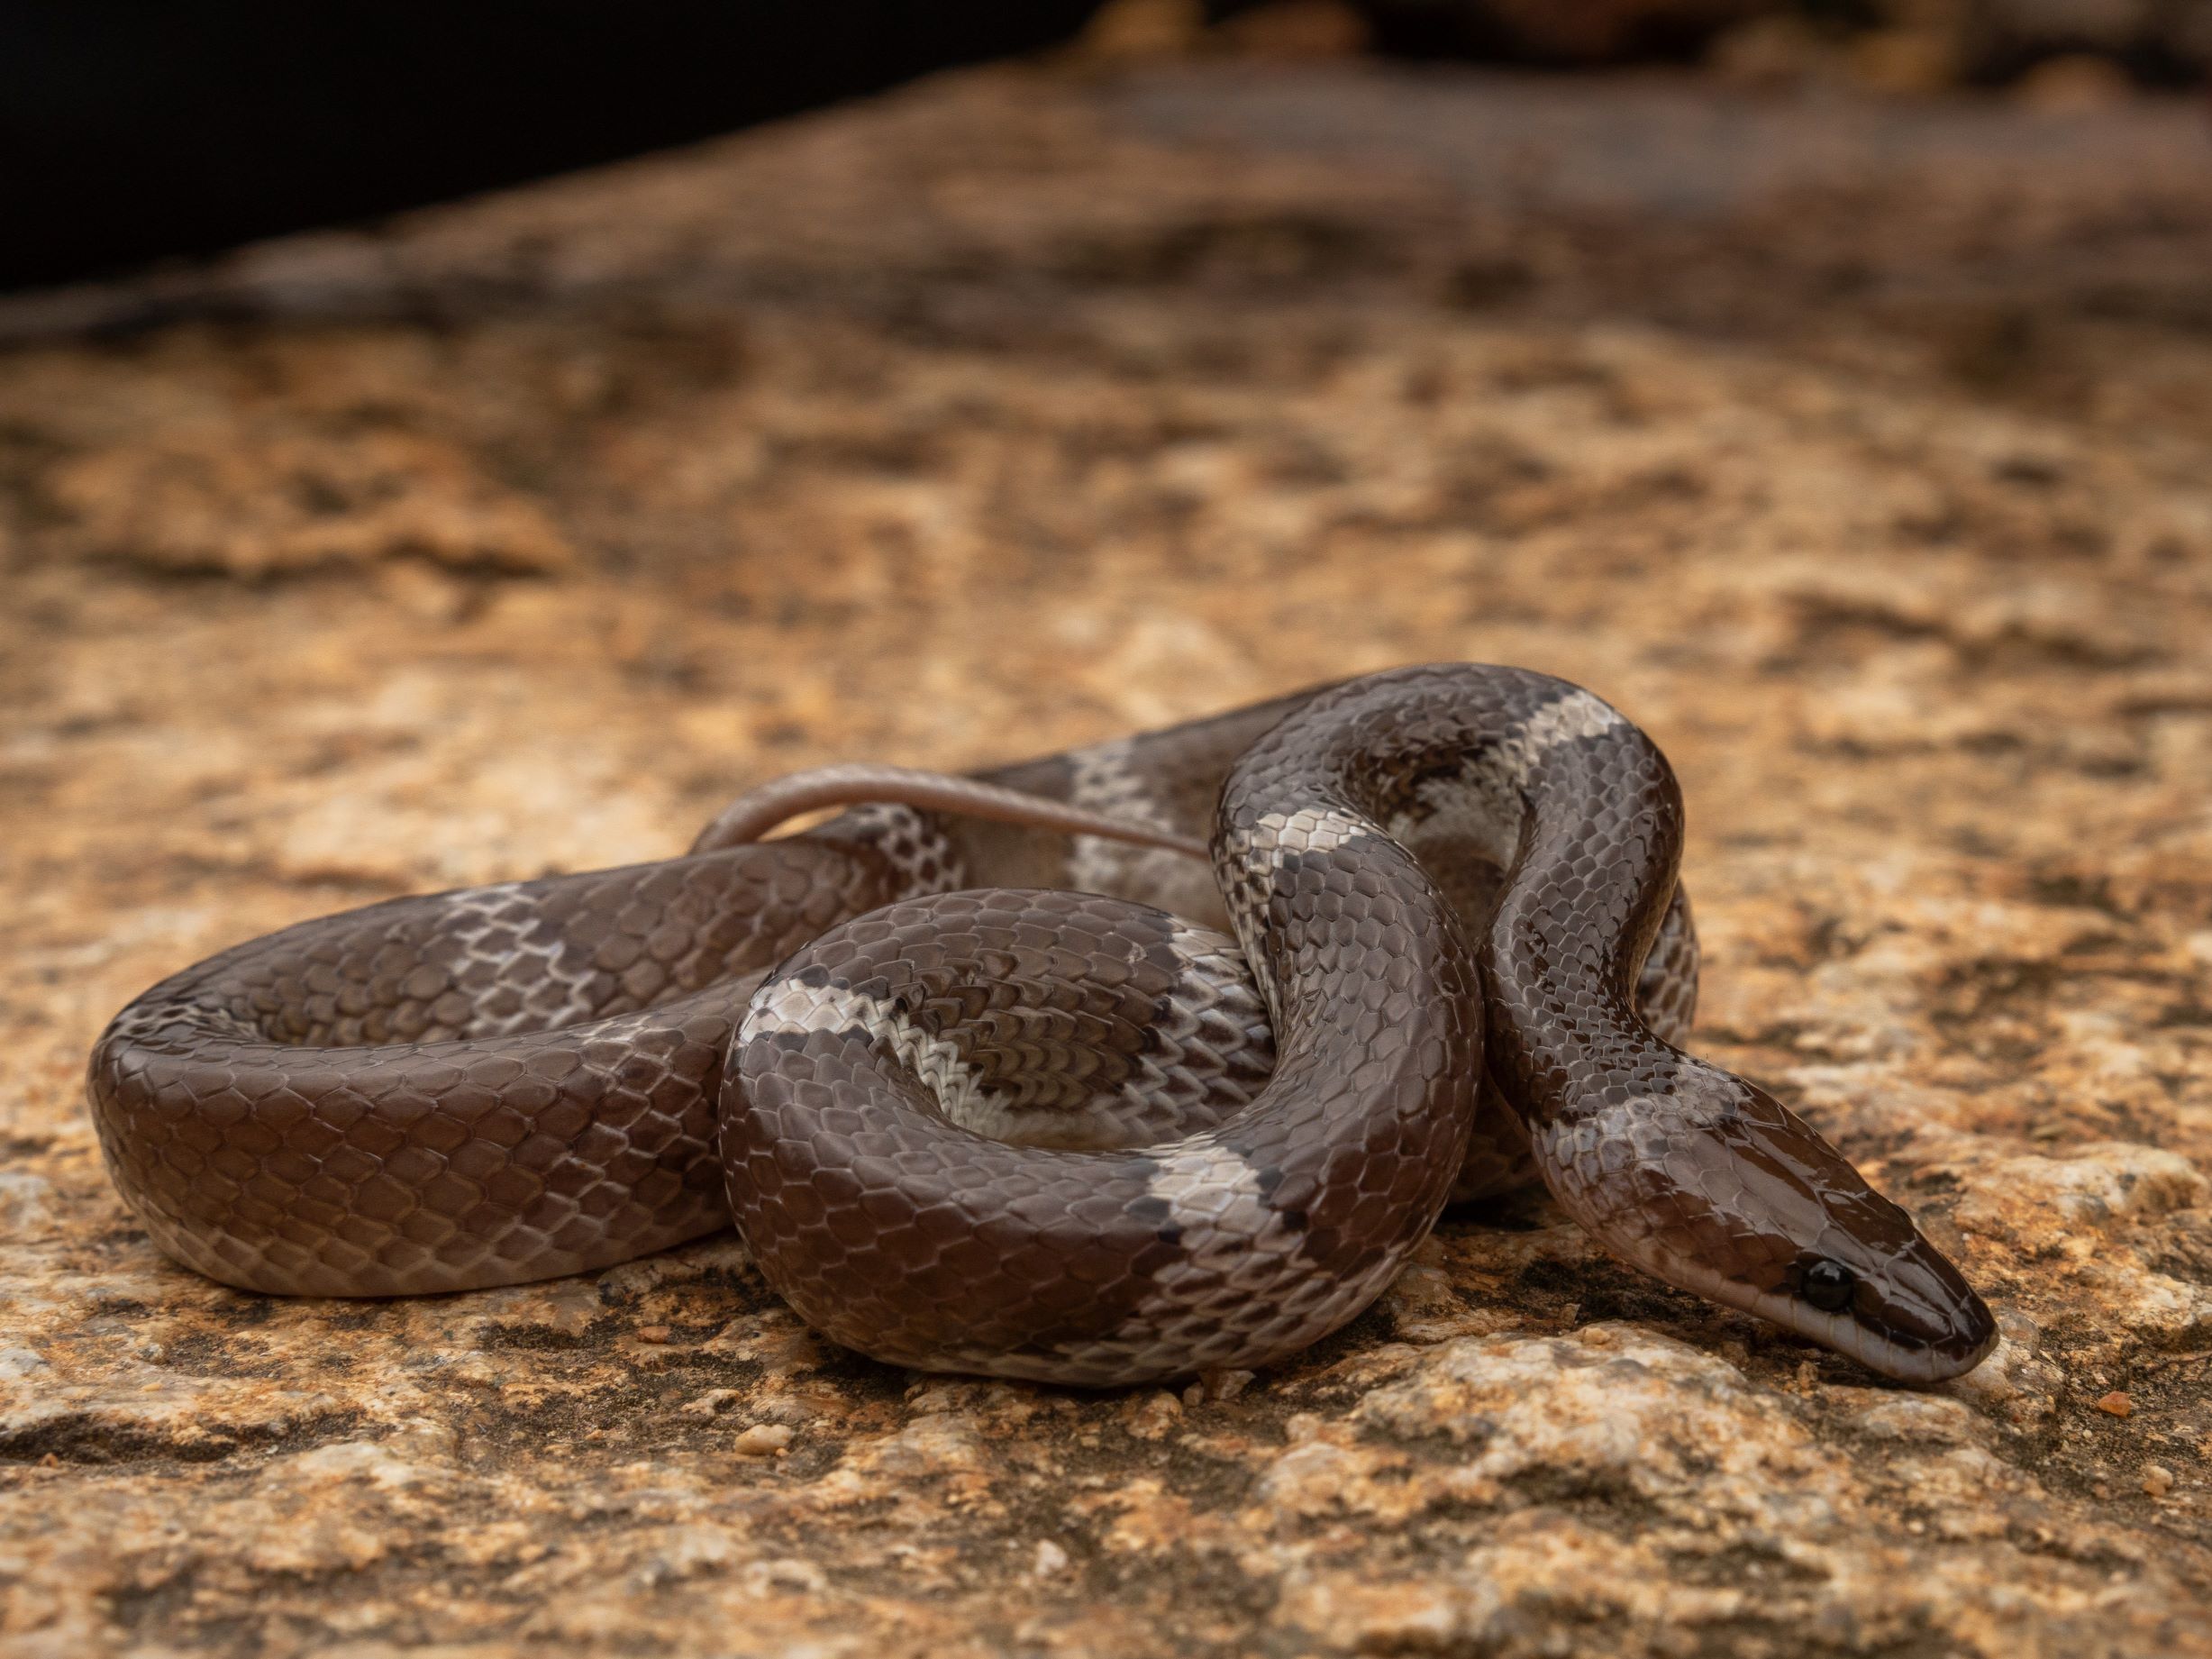 Wolf Snake from the Western Ghats